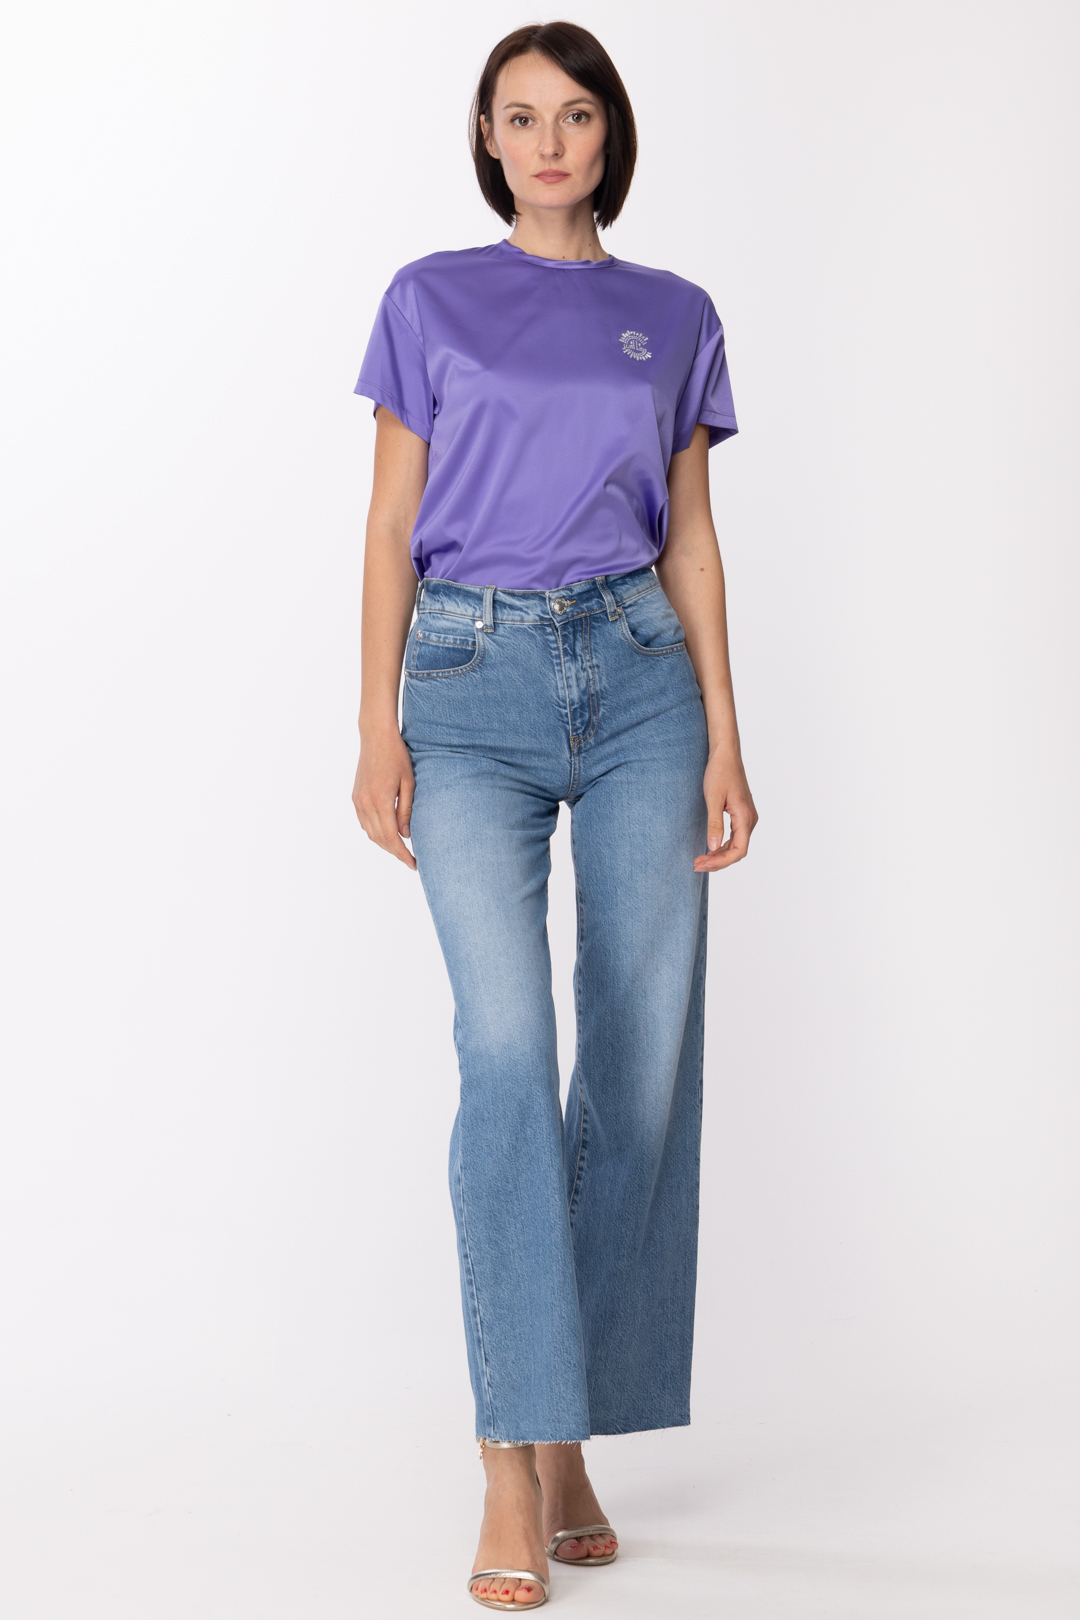 Preview: Gaelle Paris Satin blouse with embroidered logo Ametista